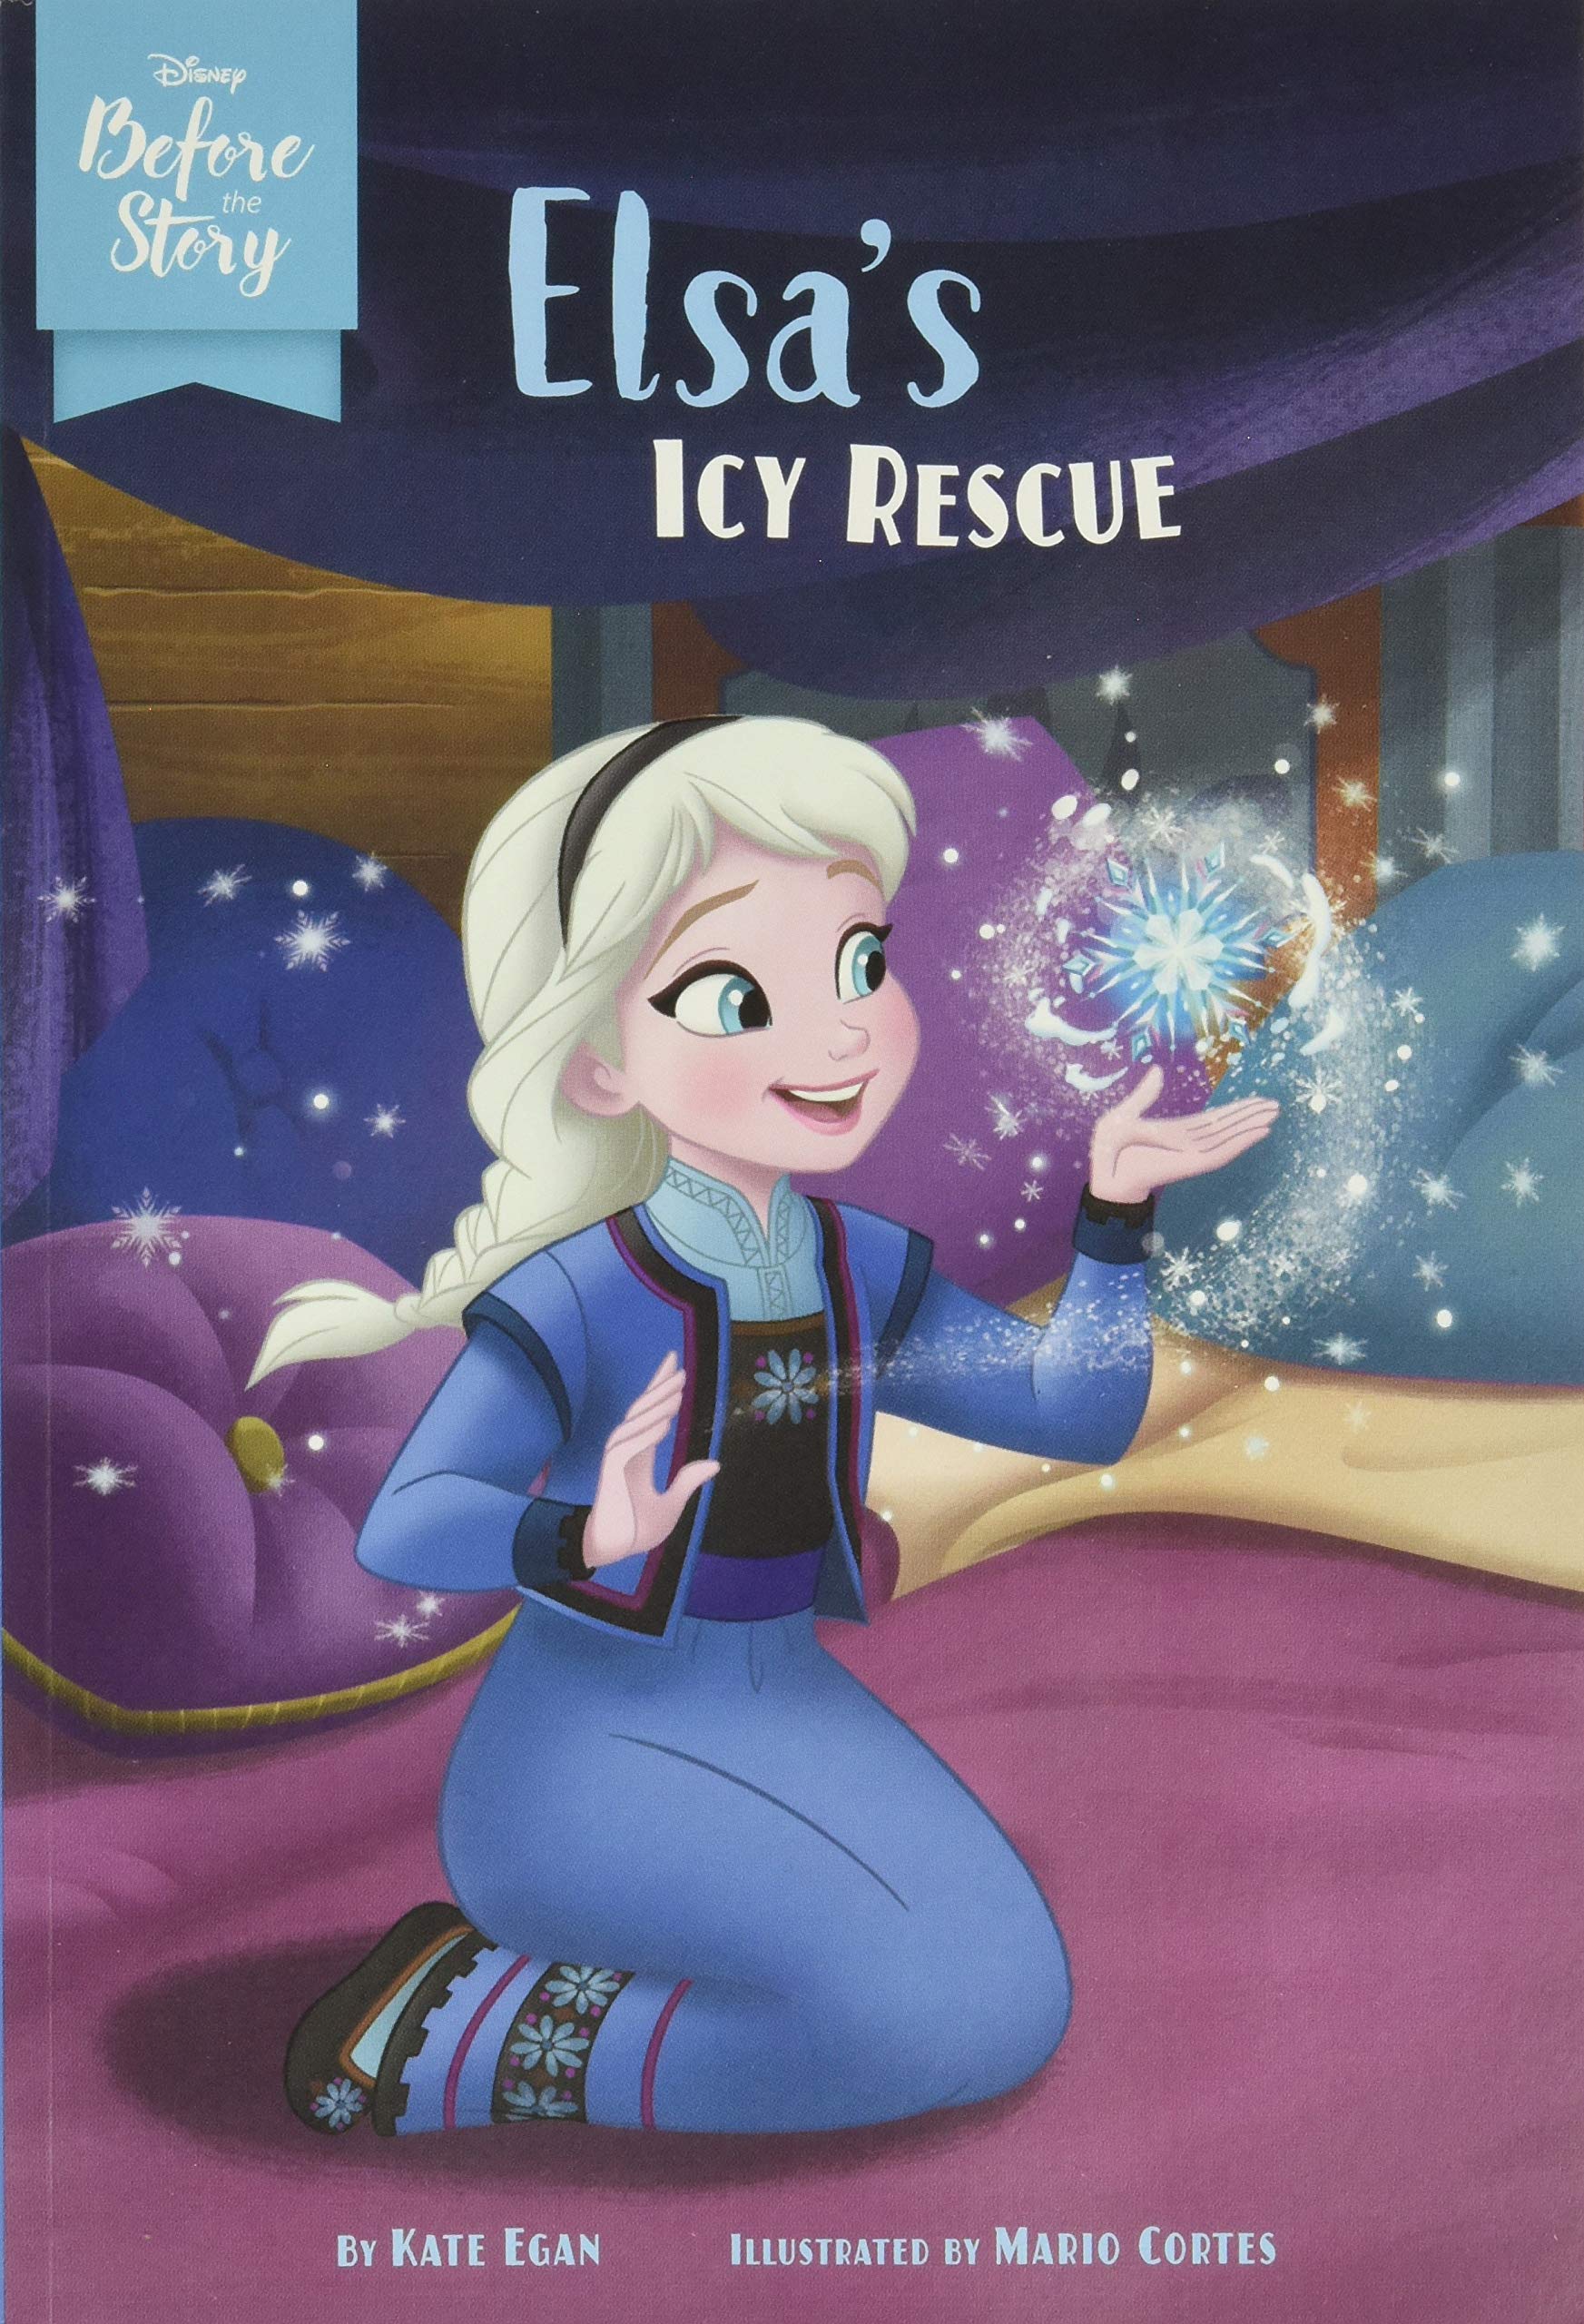 Elsa's Icy Rescue (Disney before the Story) [Paperback]